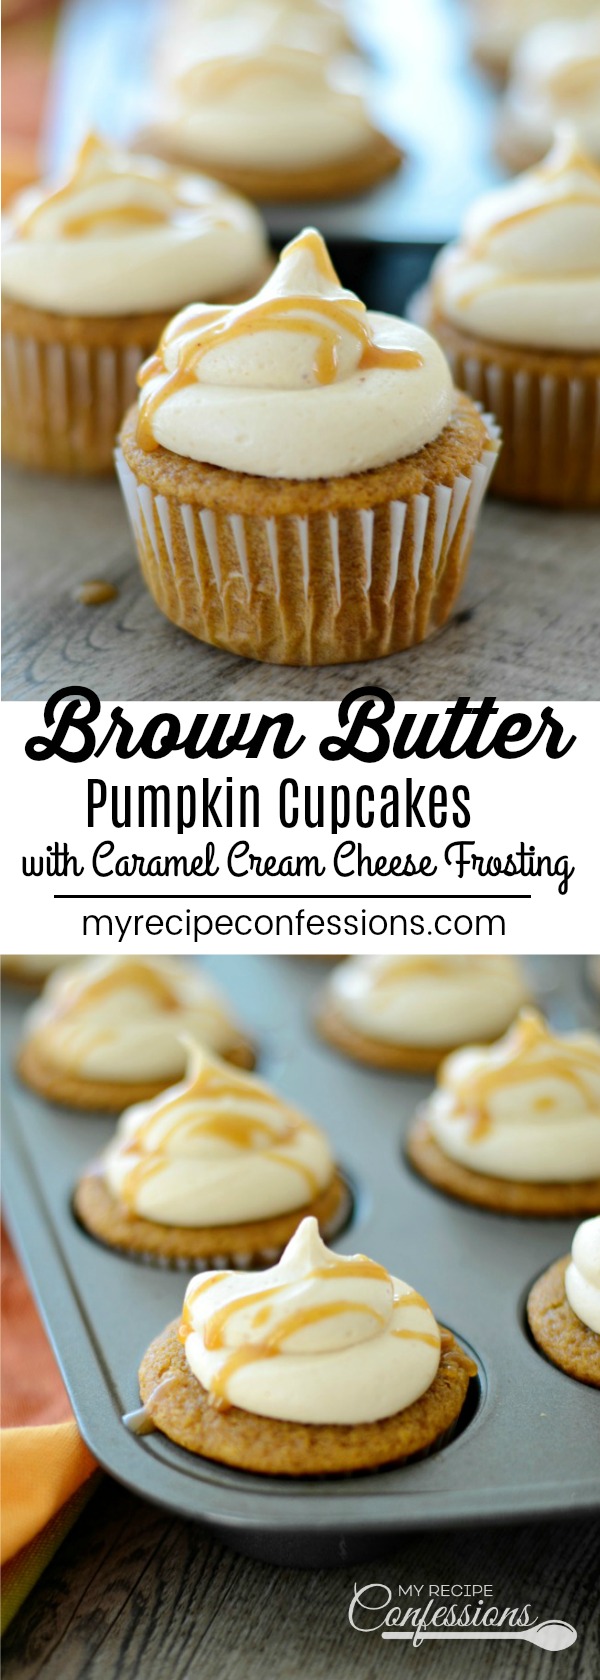 Brown Butter Pumpkin Cupcakes with Caramel Cream Cheese Frosting is the best recipe ever! These made from scratch cupcakes are super moist and  the caramel cream cheese frosting is out of this world! 